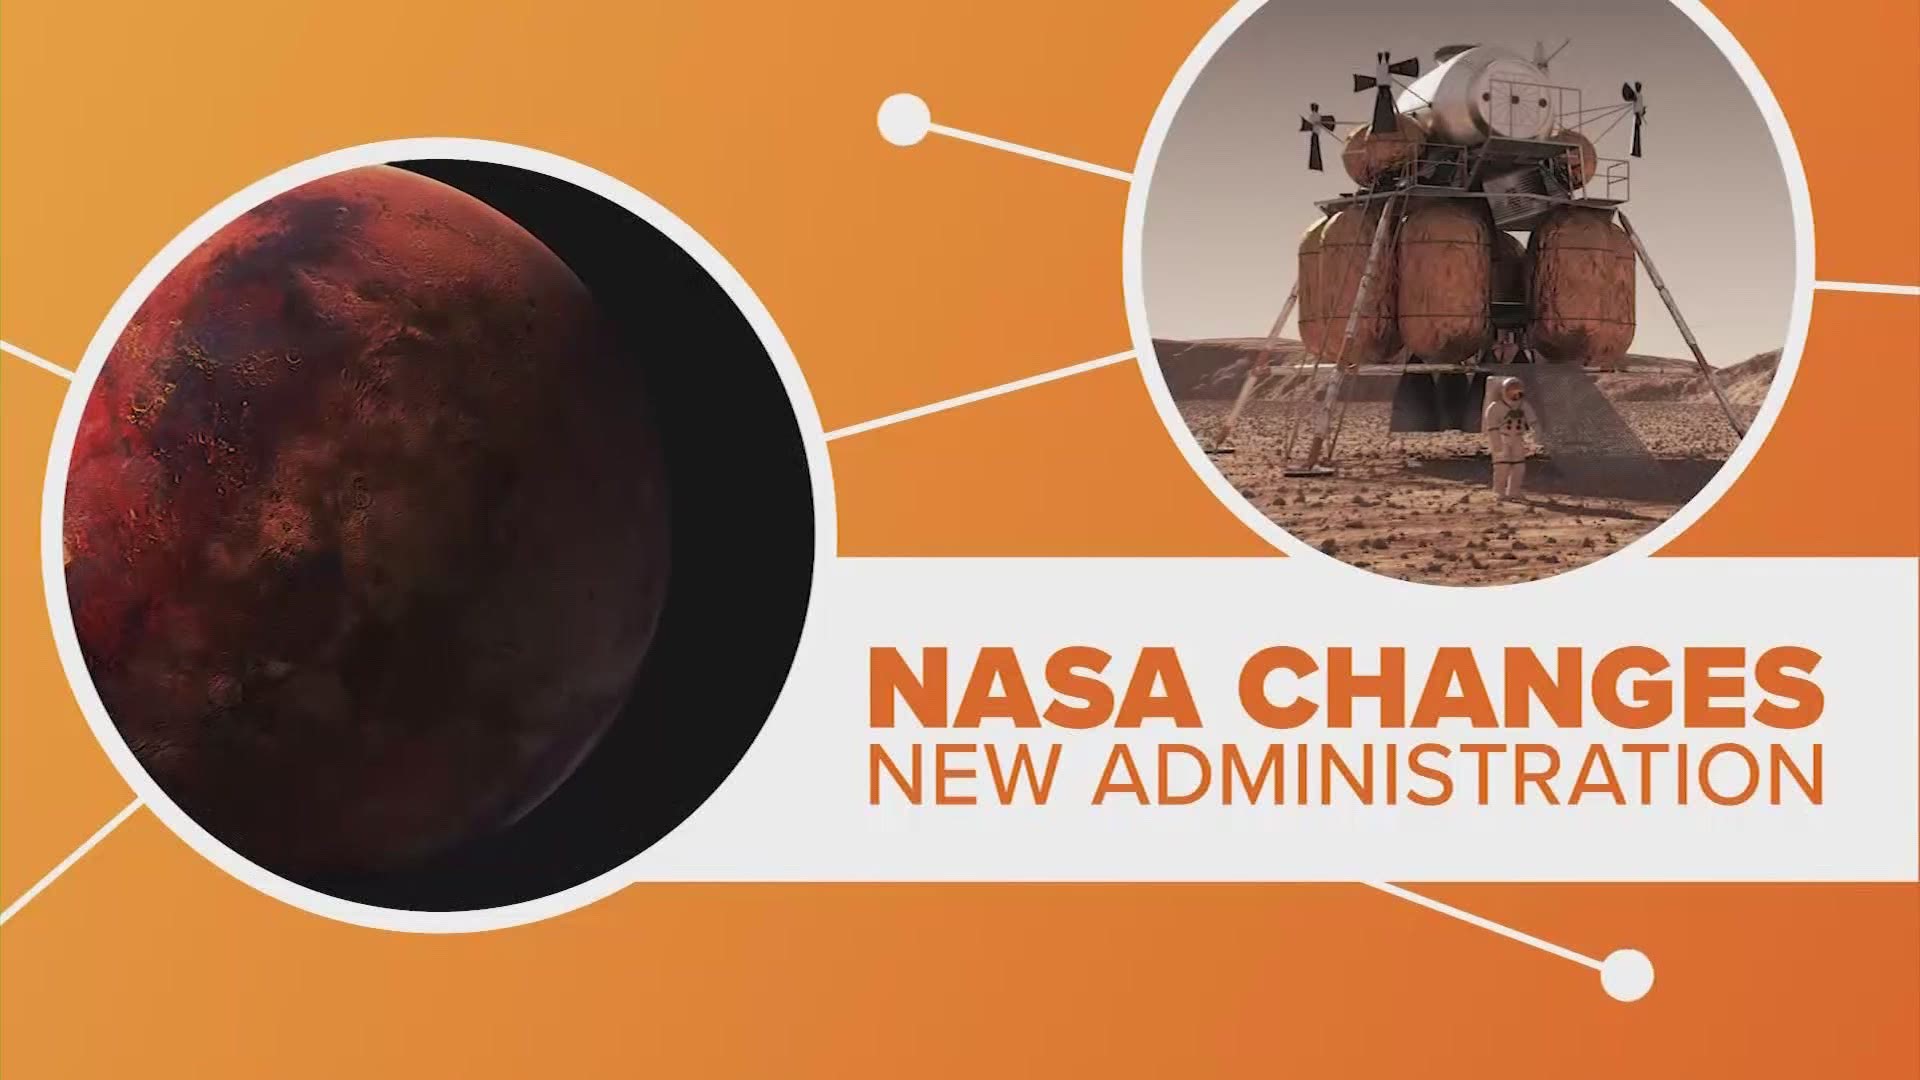 President Biden has named an acting head of NASA but what other changes are in store for the agency? Let’s connect the dots.